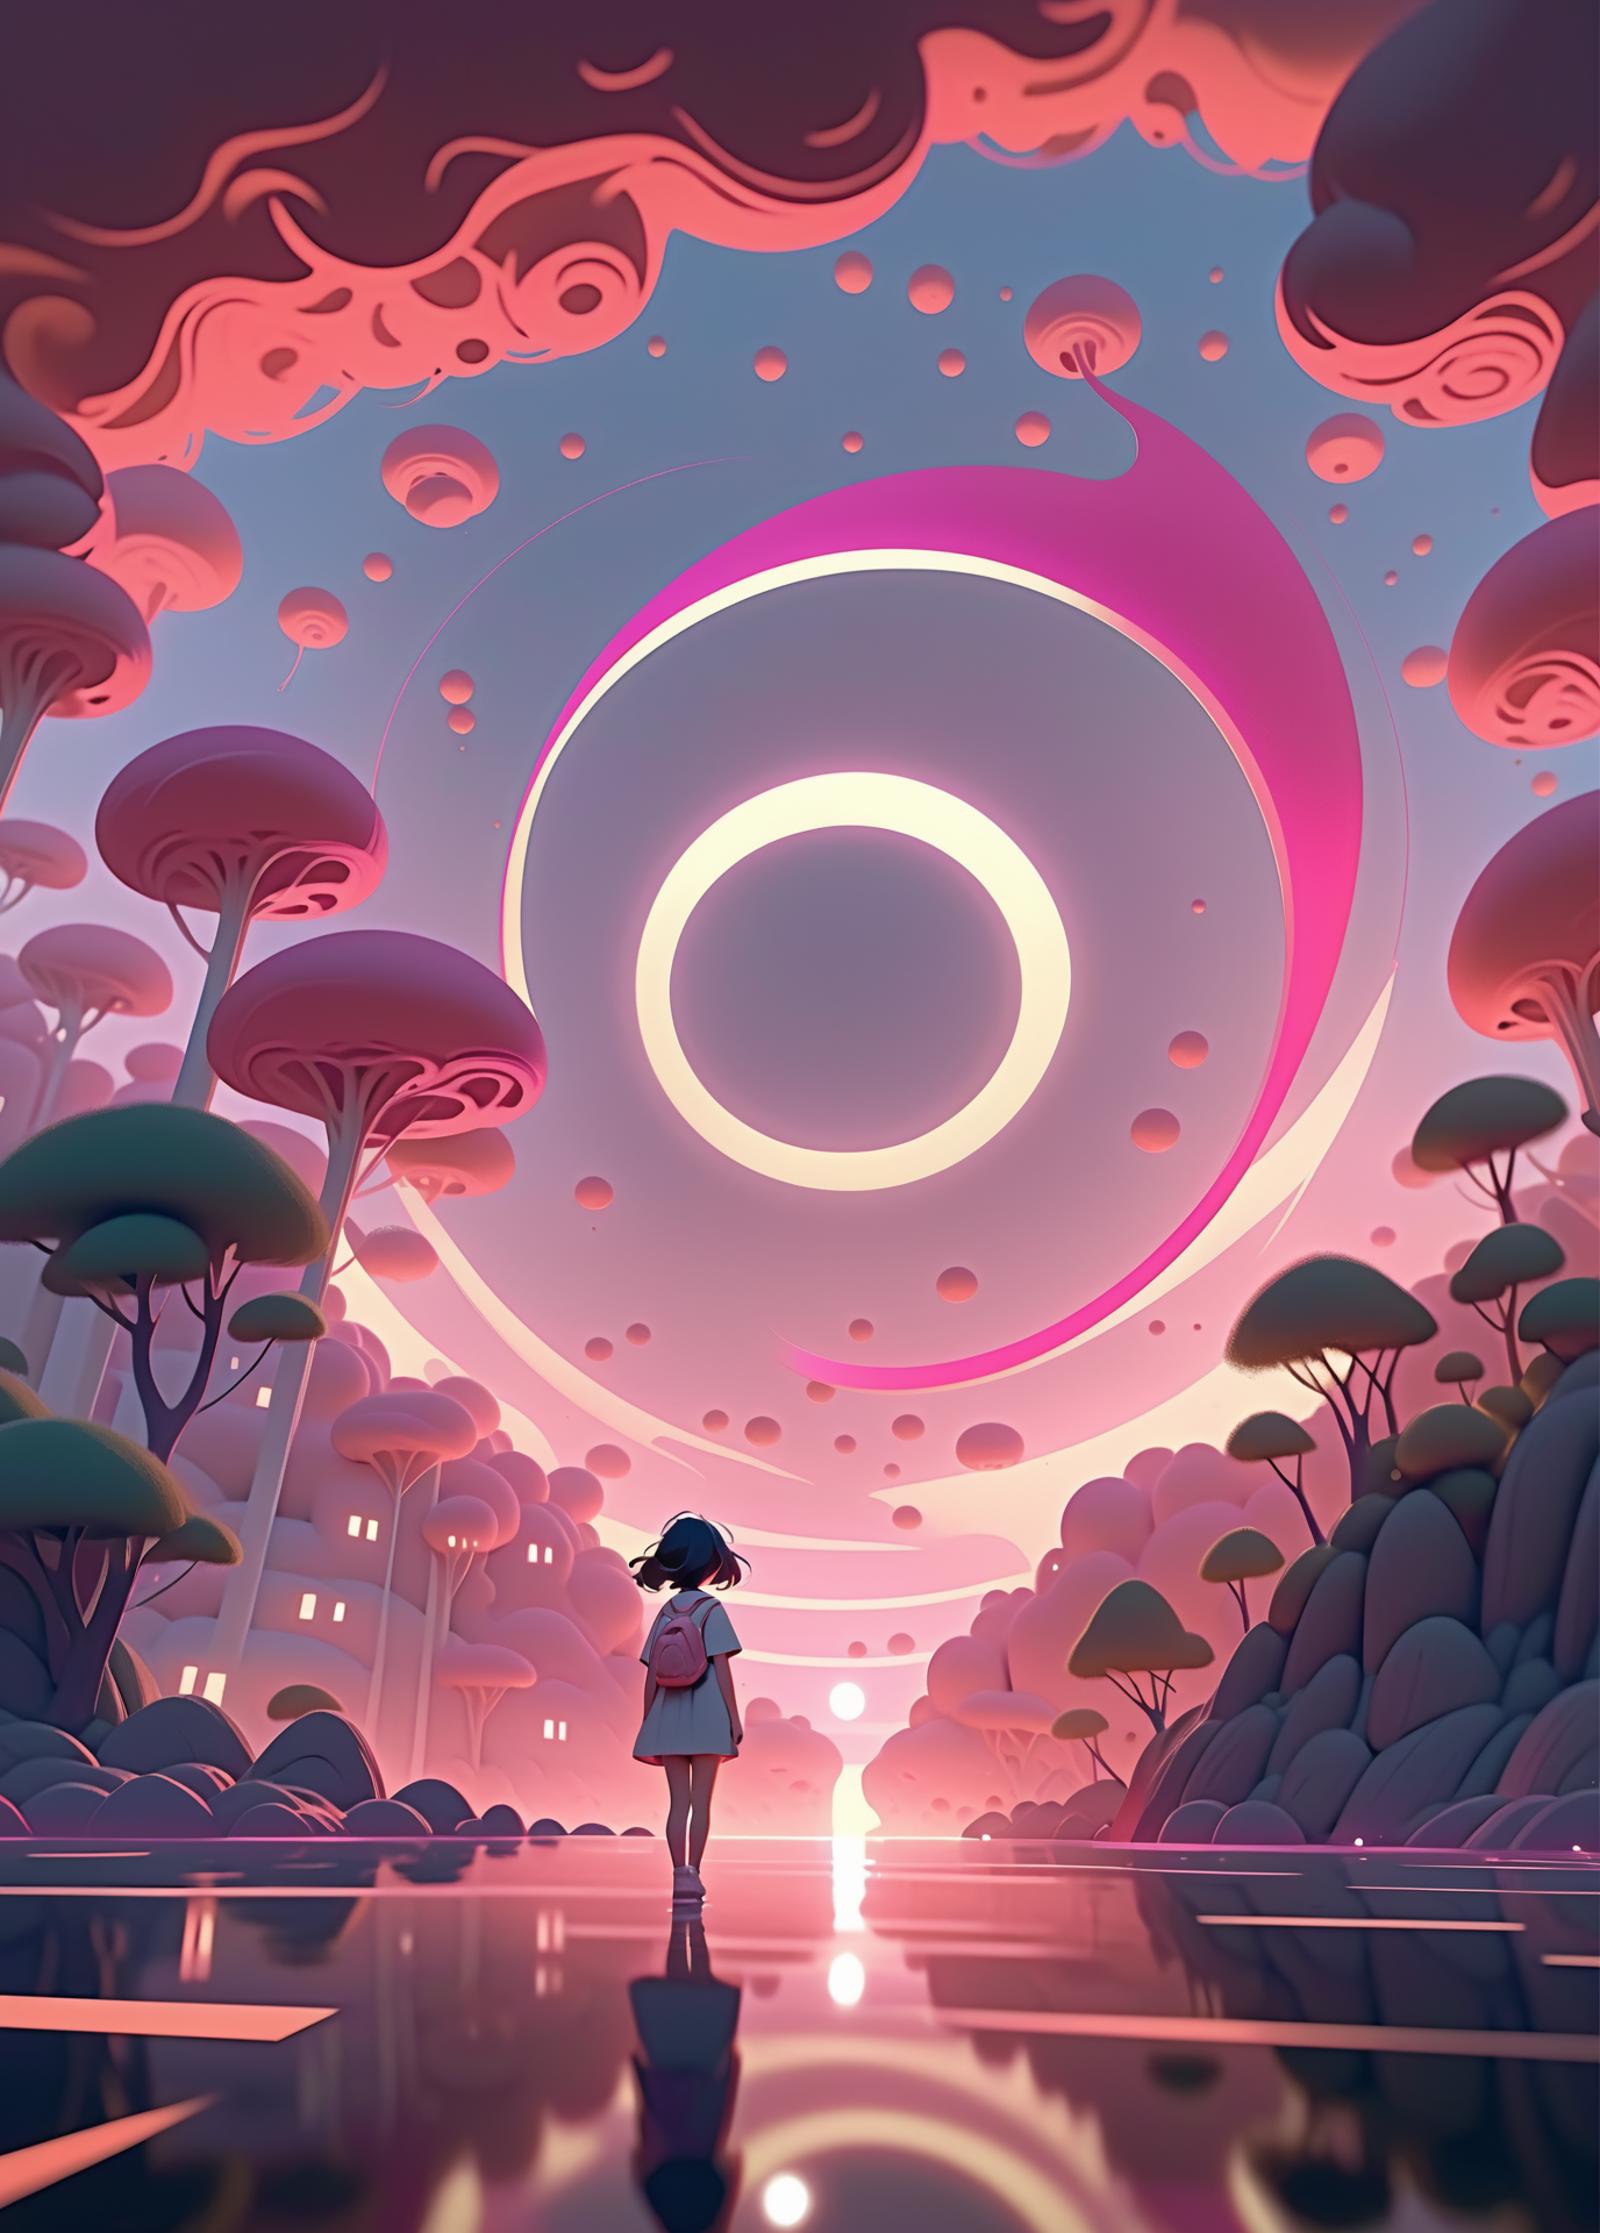 A Girl Standing in Front of a Pink Circle with Mushrooms in an Anime Style Illustration.